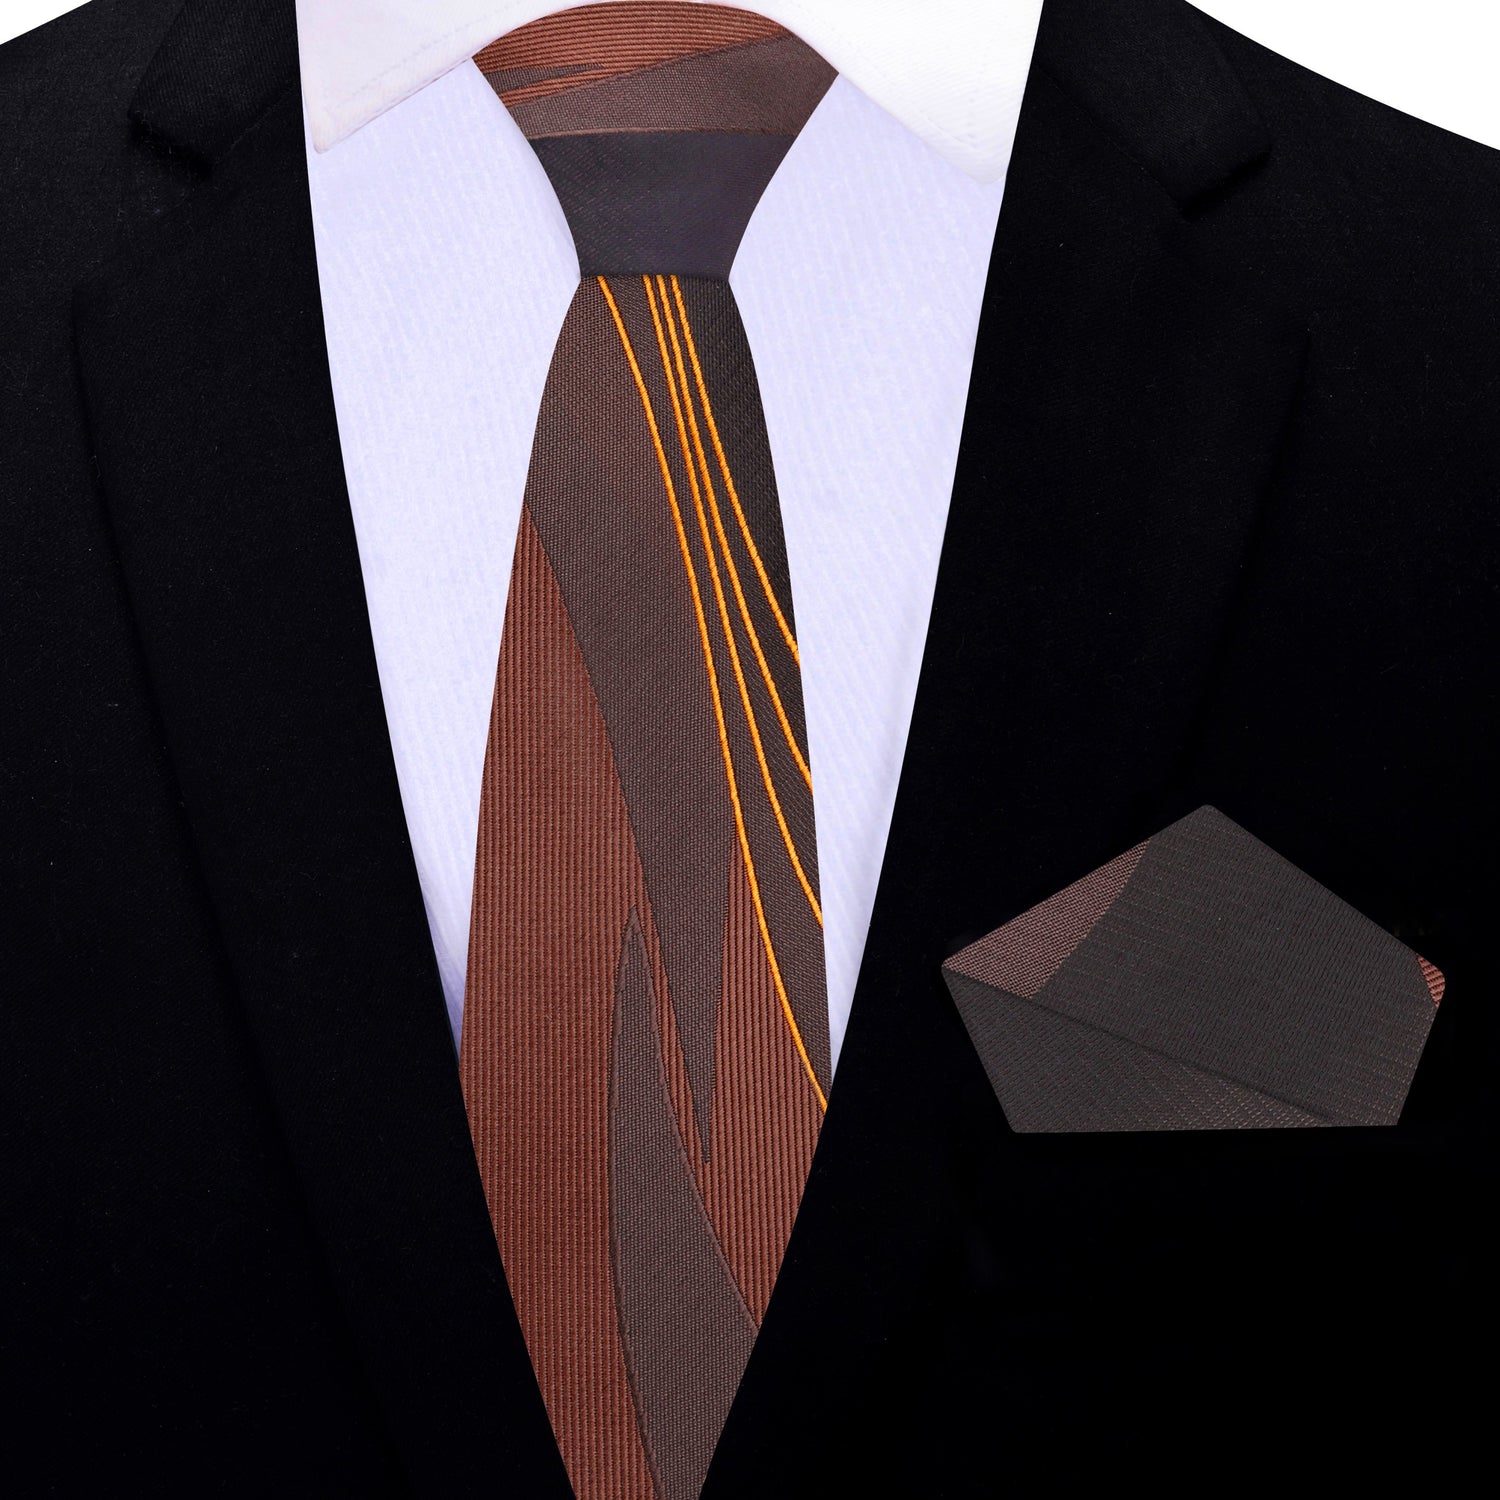 Thin Tie: Shades of Brown Abstract Lines Tie and matching Square